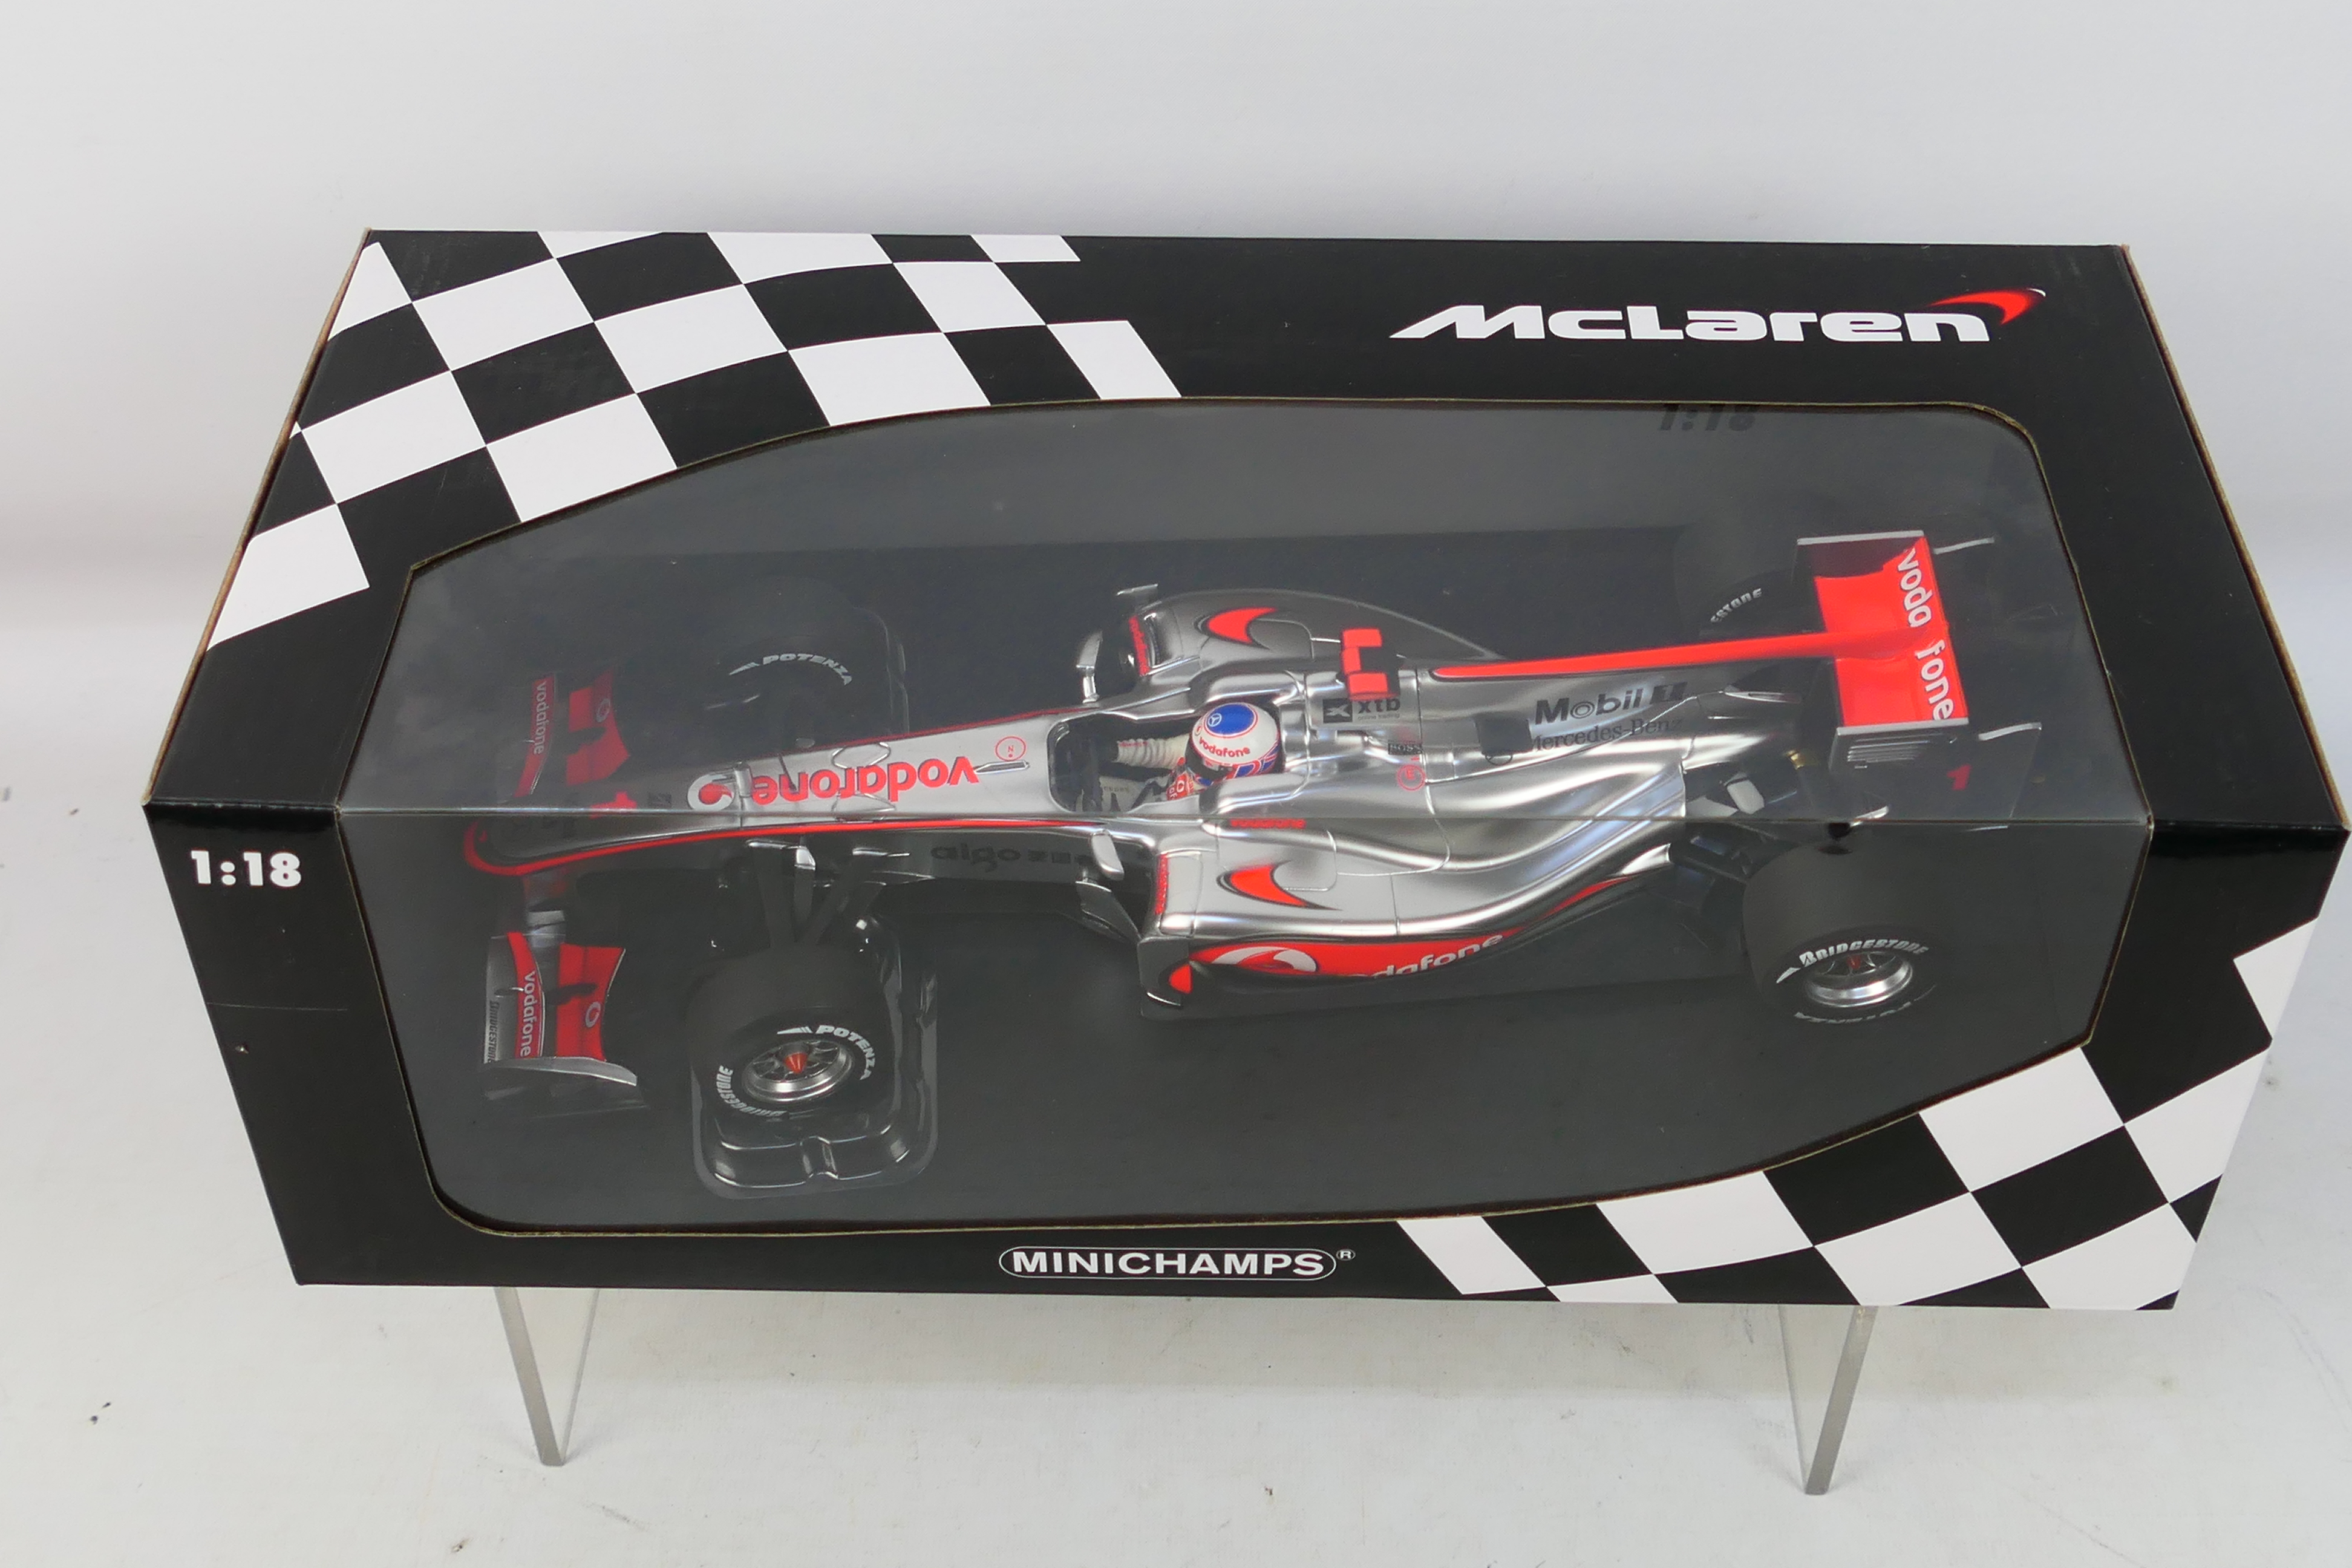 Minichamps- A boxed 1:18 scale McLaren Mercedes MP4-25 Jenson Button car which appears Mint in a - Image 2 of 2